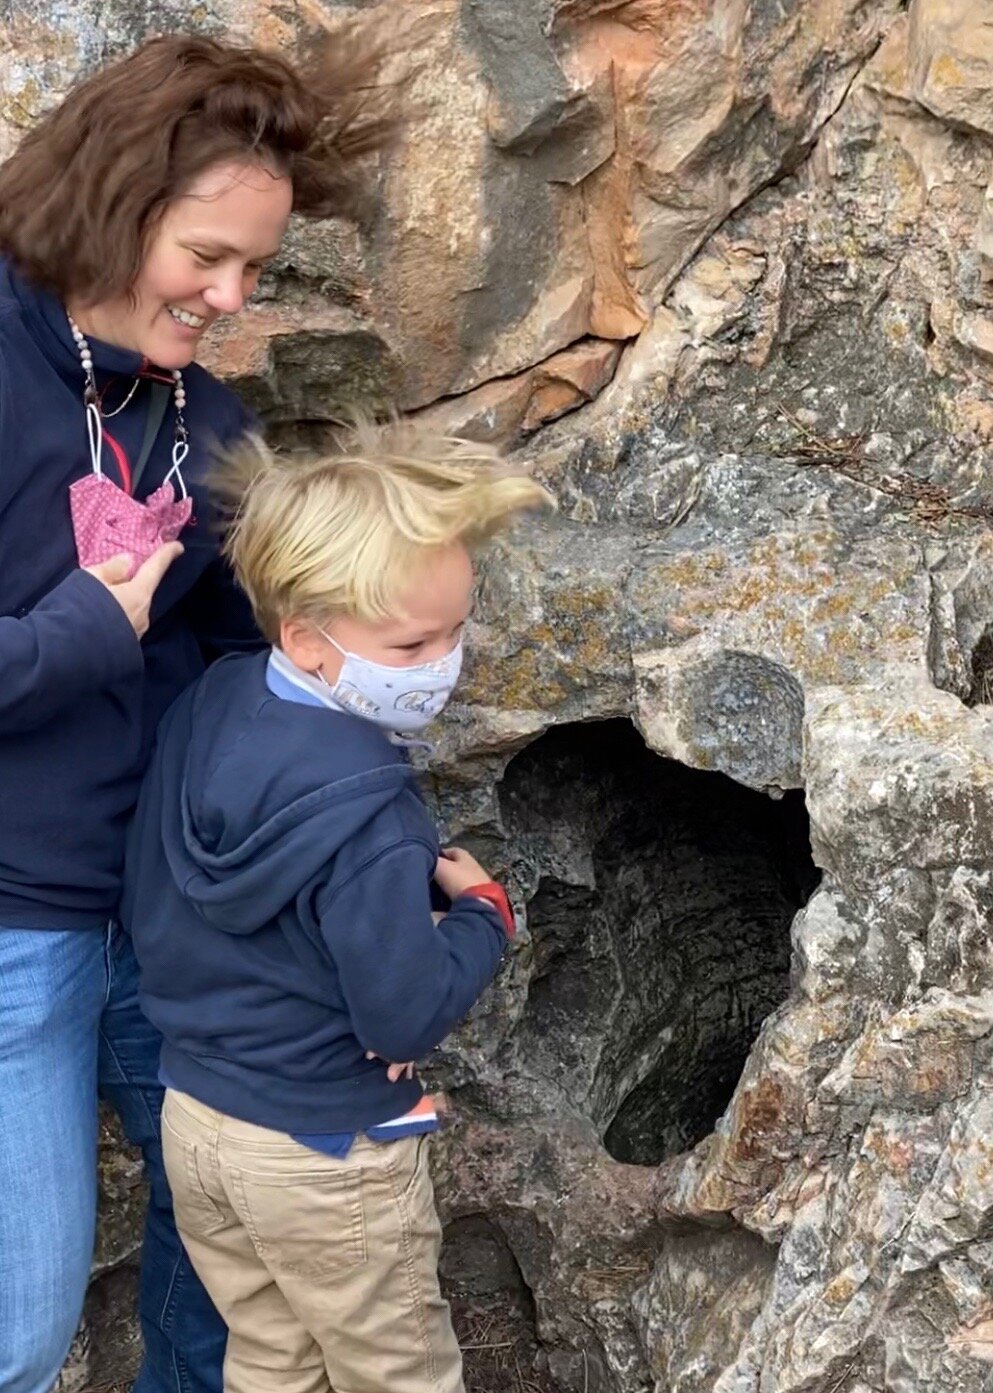 Mama and Popcorn feeling the wind and trying to look down into the first discovered entrance to Wind Cave.  Anyone want to climb down that?  Screenshot by Karen from video by Jude Boudreaux, May 26, 2021